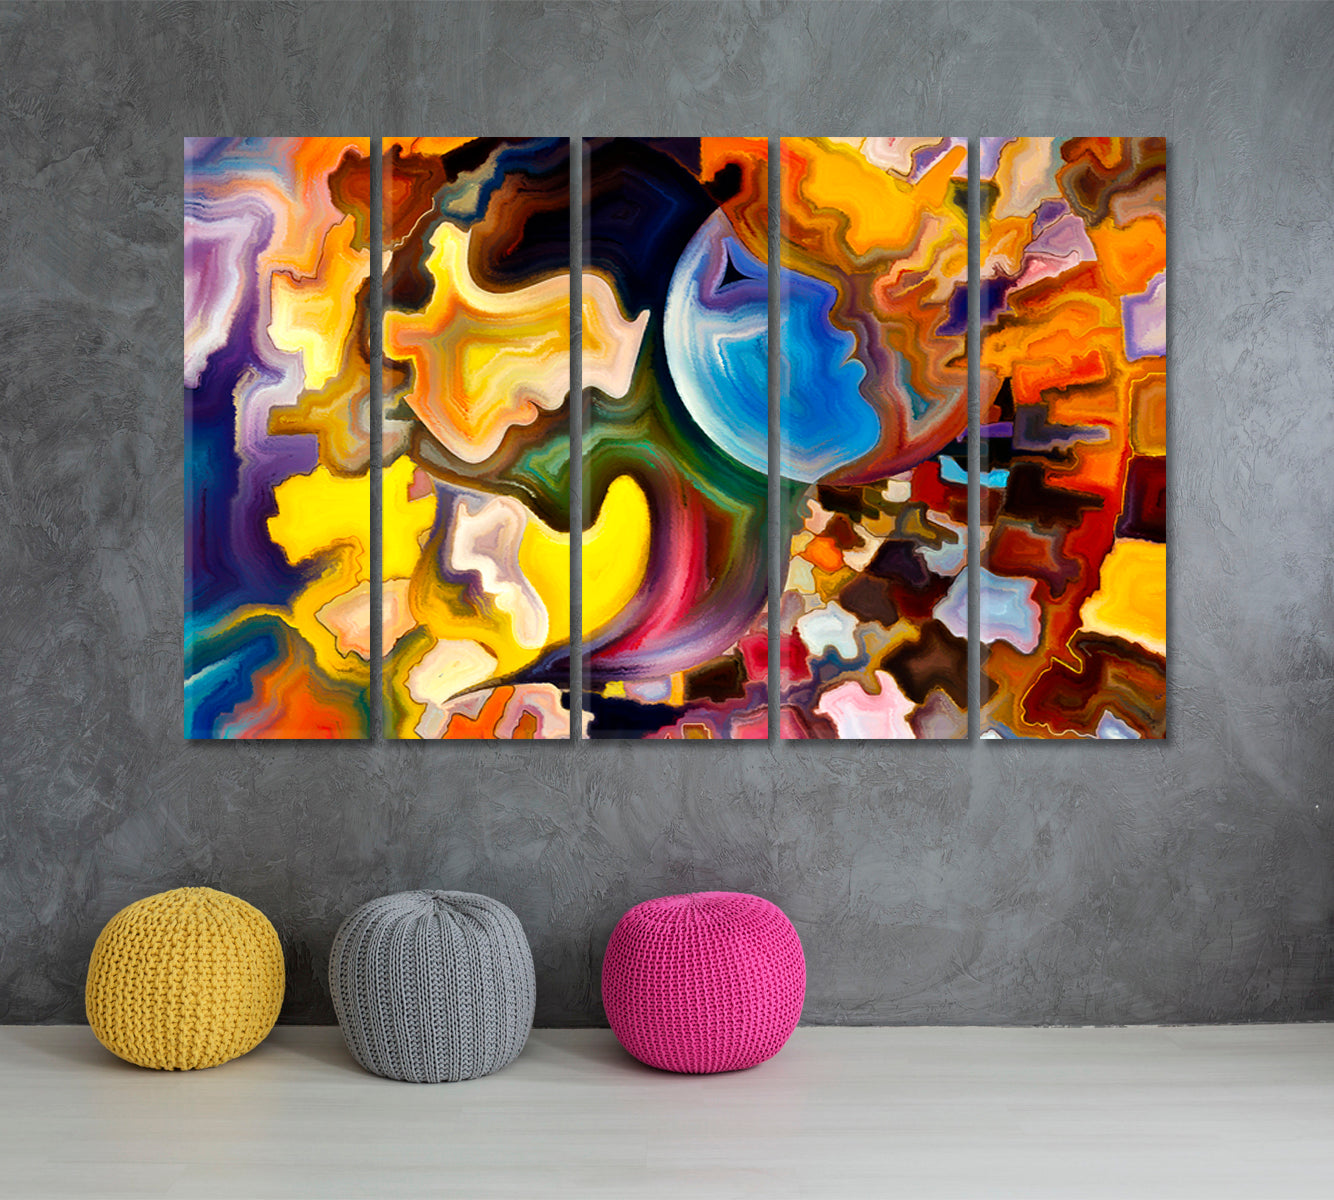 Extrasensory Perception, Profile Lines and Colorful Shapes Abstract Art Print Artesty 5 panels 36" x 24" 